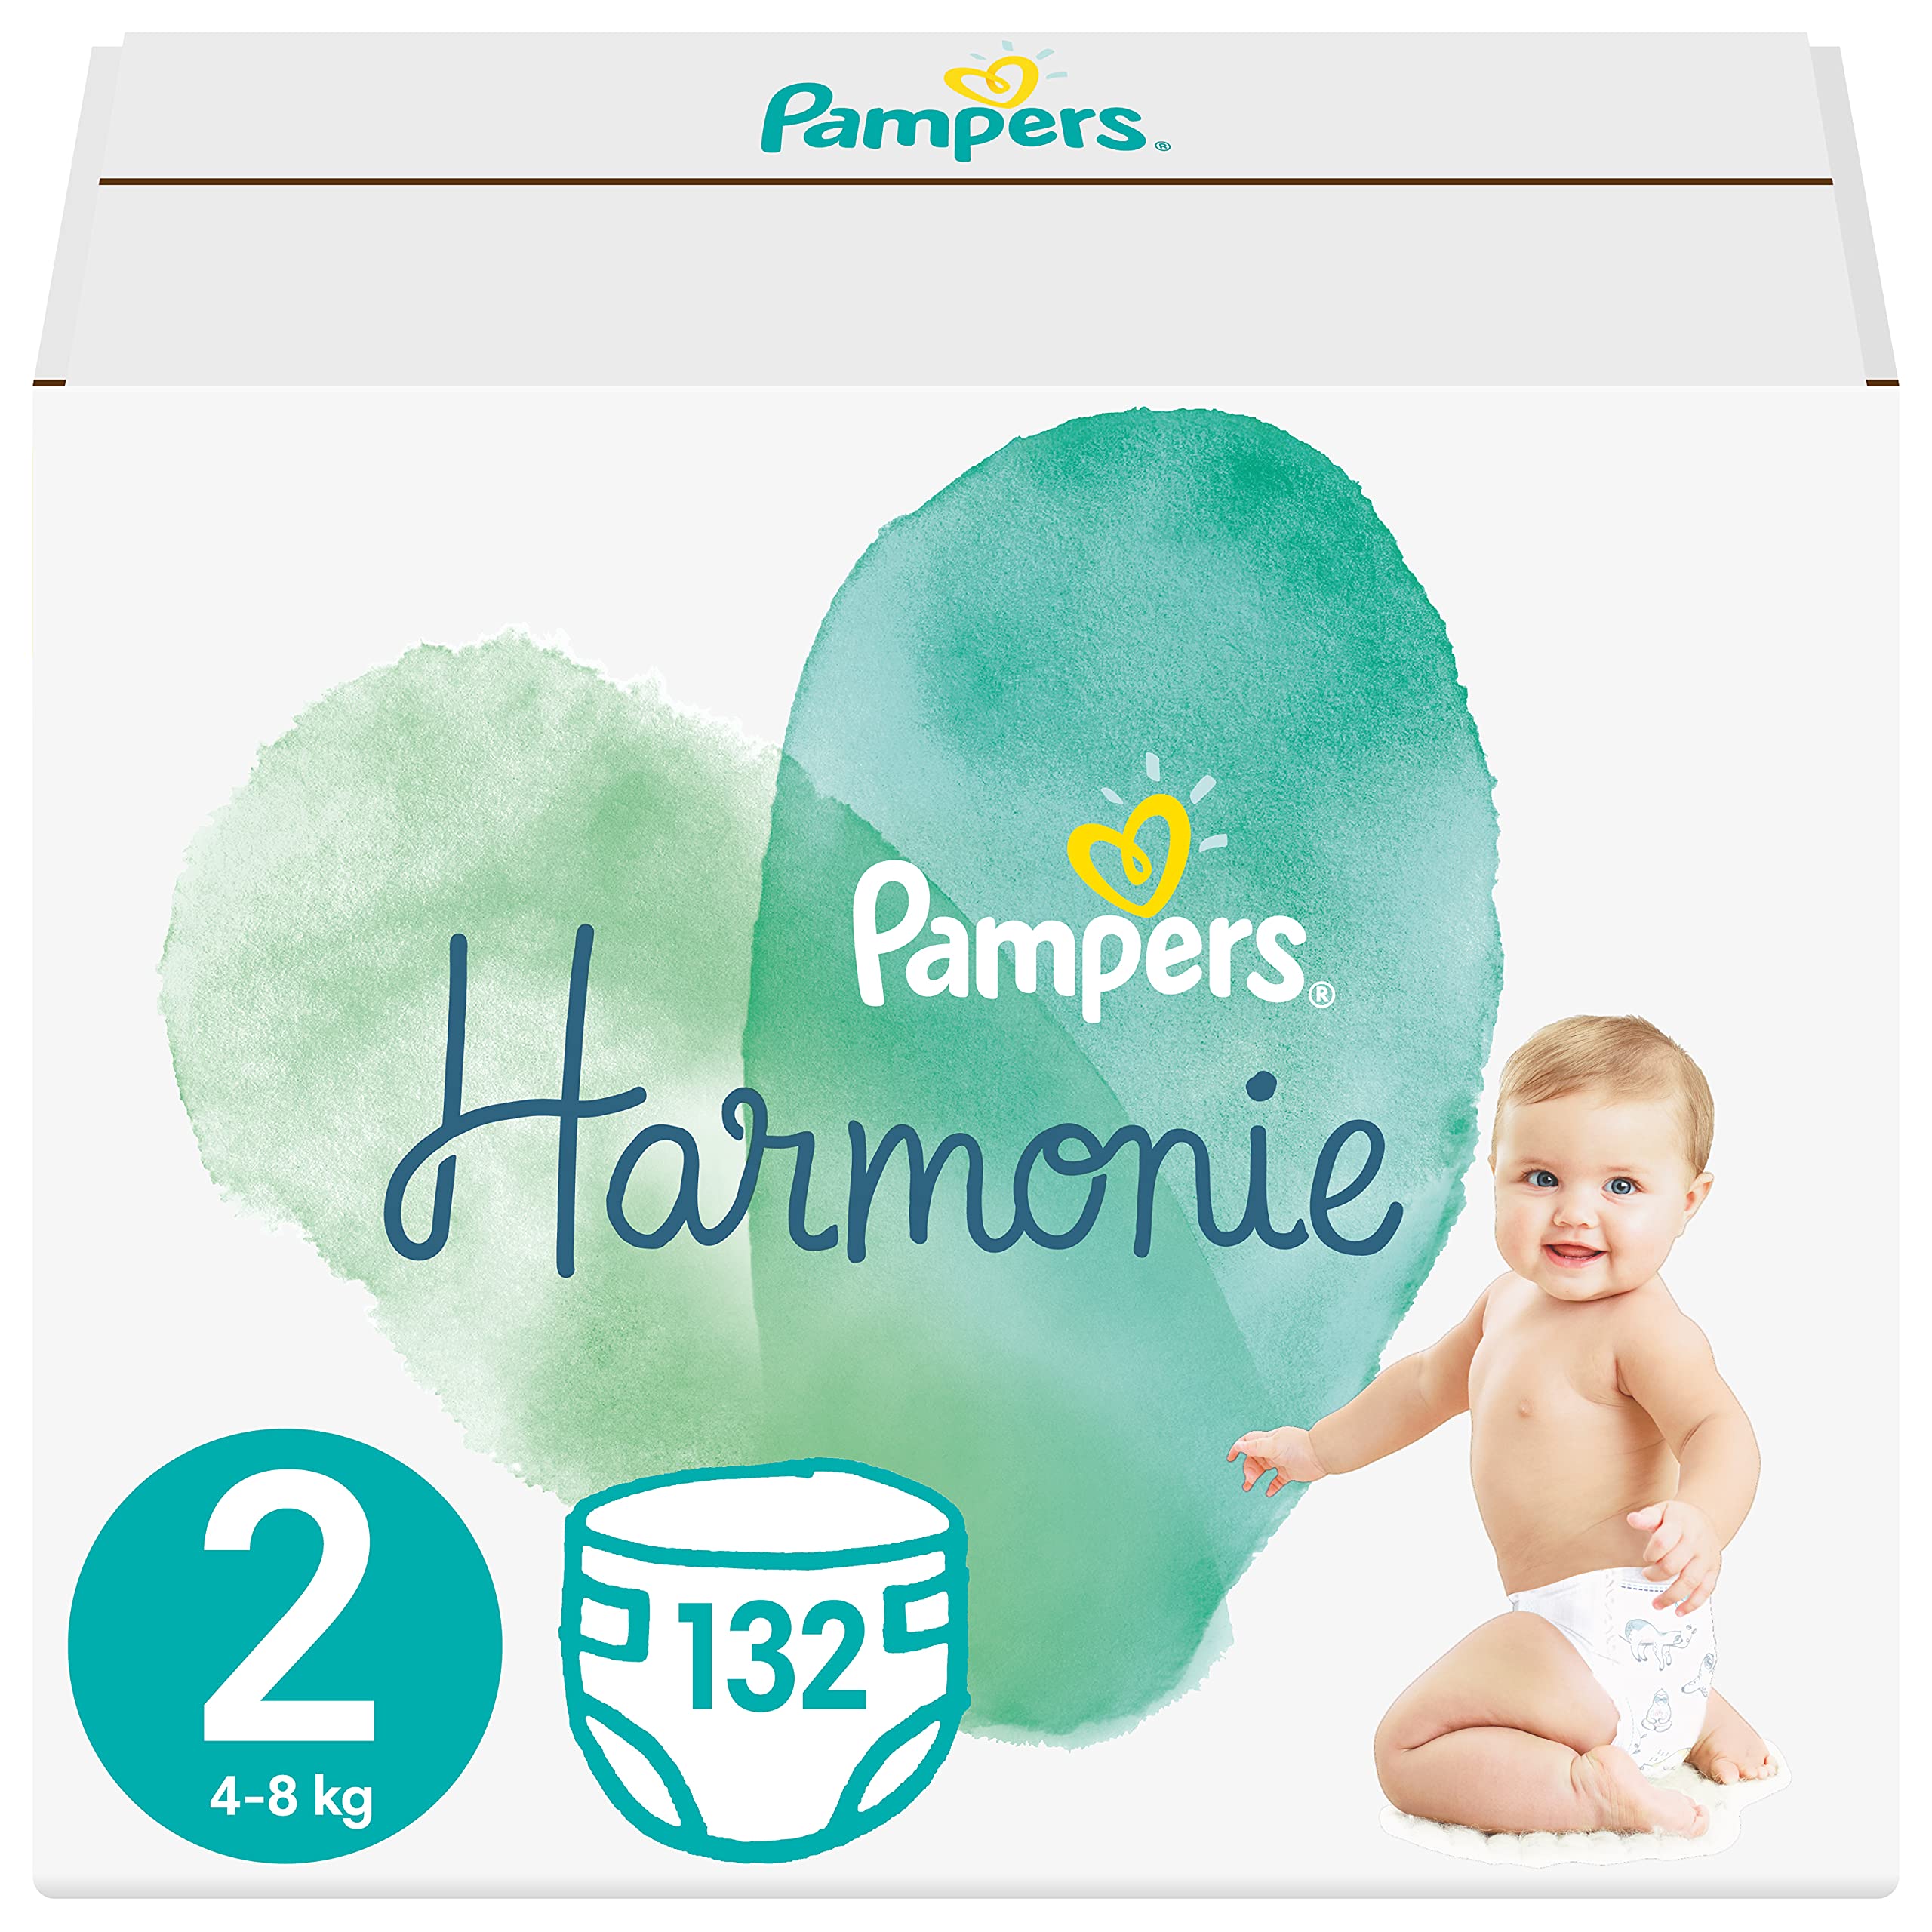 test pampers